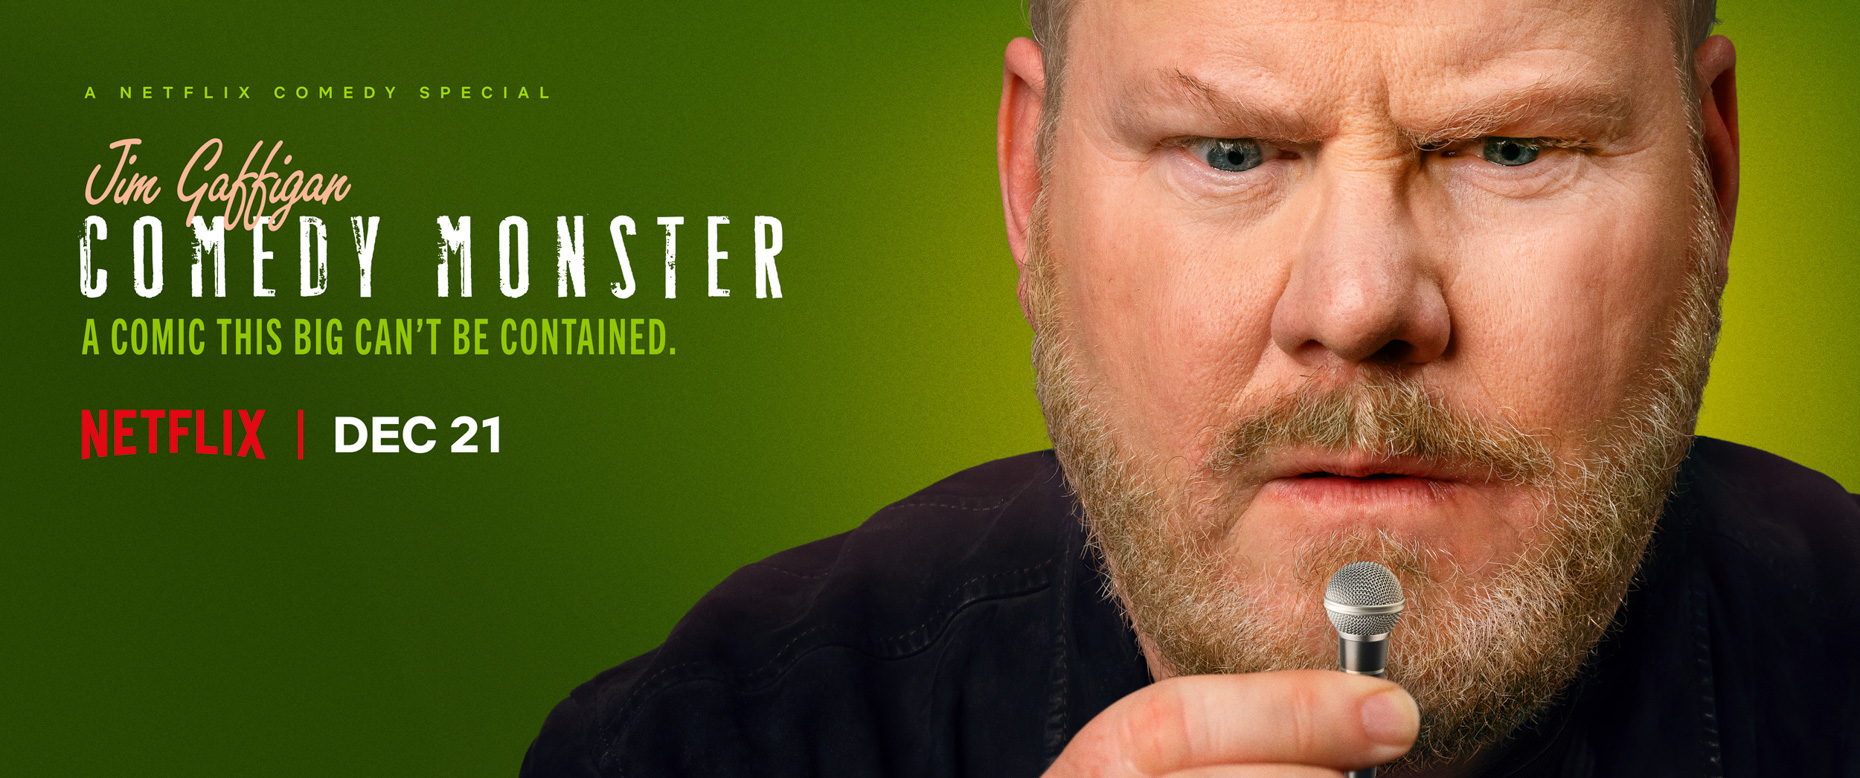 Jim GaffiganComedy Monster for Netflixby Paul Mobley